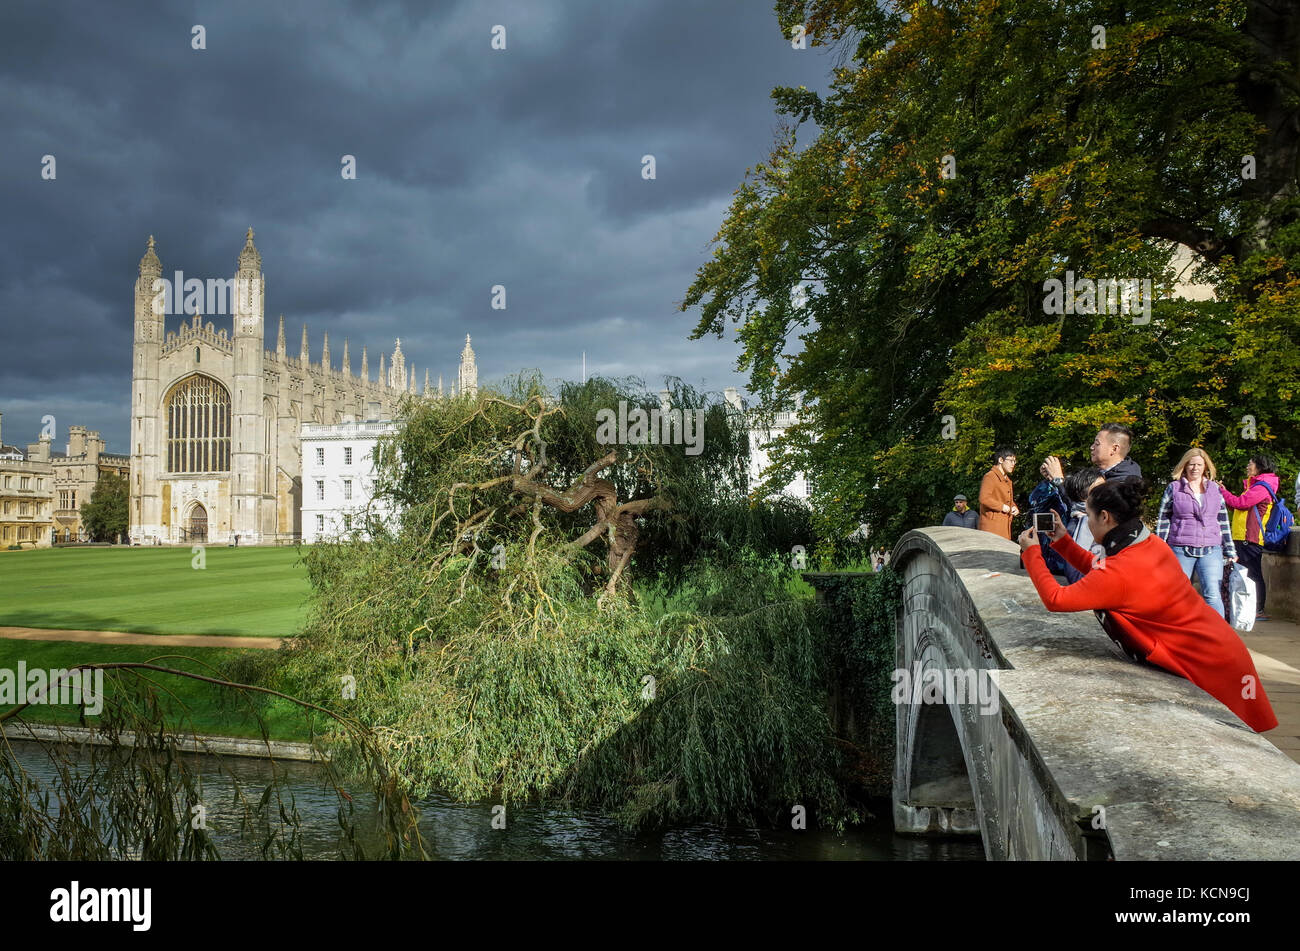 Cambridge Tourism - Cambridge tourists take photos of the famous Kings College Chapel, lit by evening sunlight under dark skies. Stock Photo